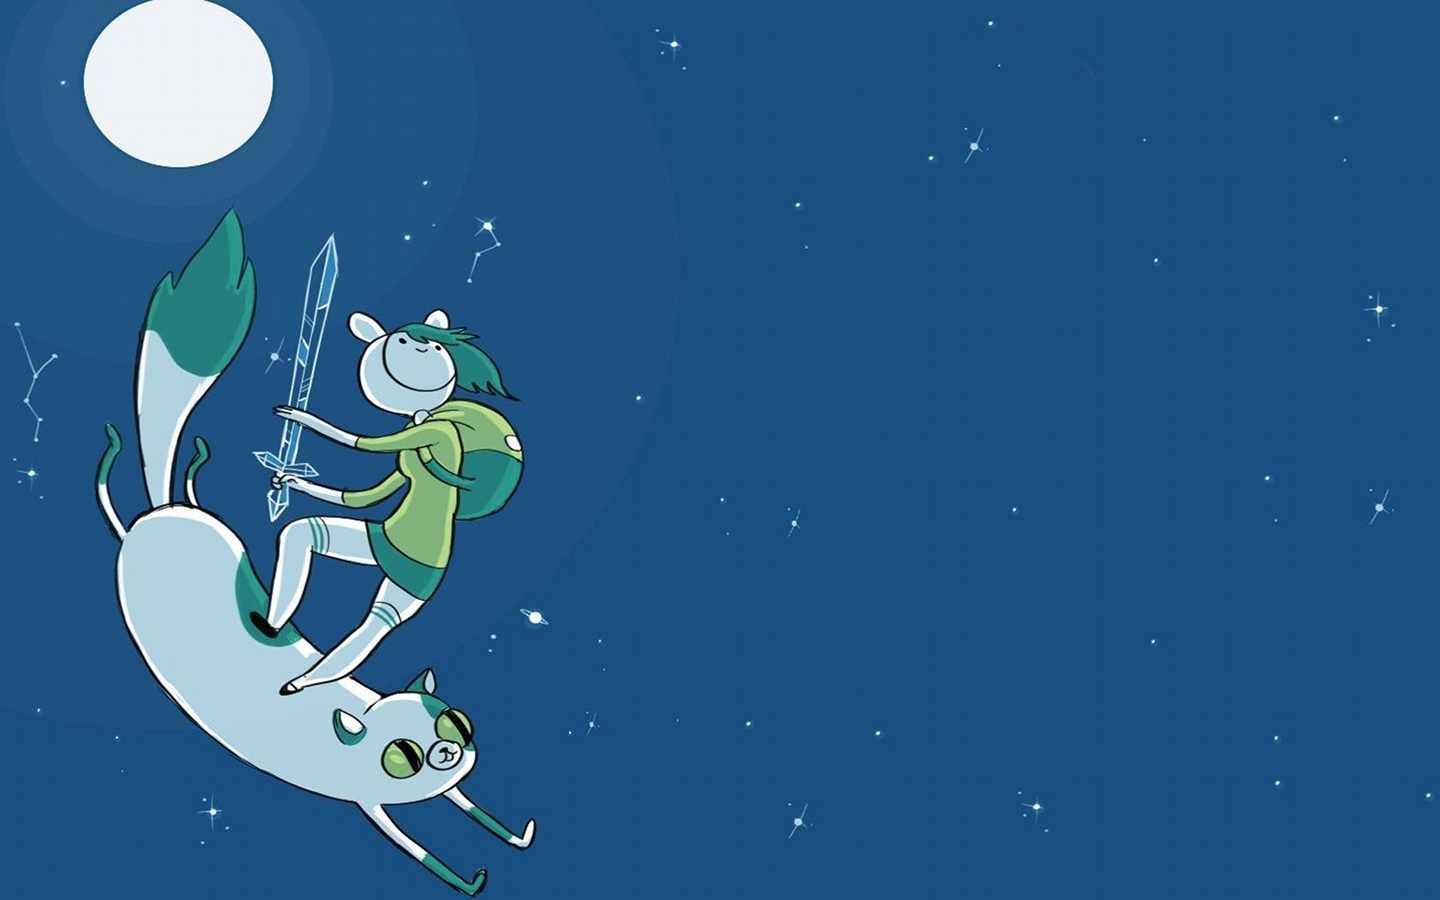 Finn and Jake from Adventure Time ride a flying dog in space - Adventure Time